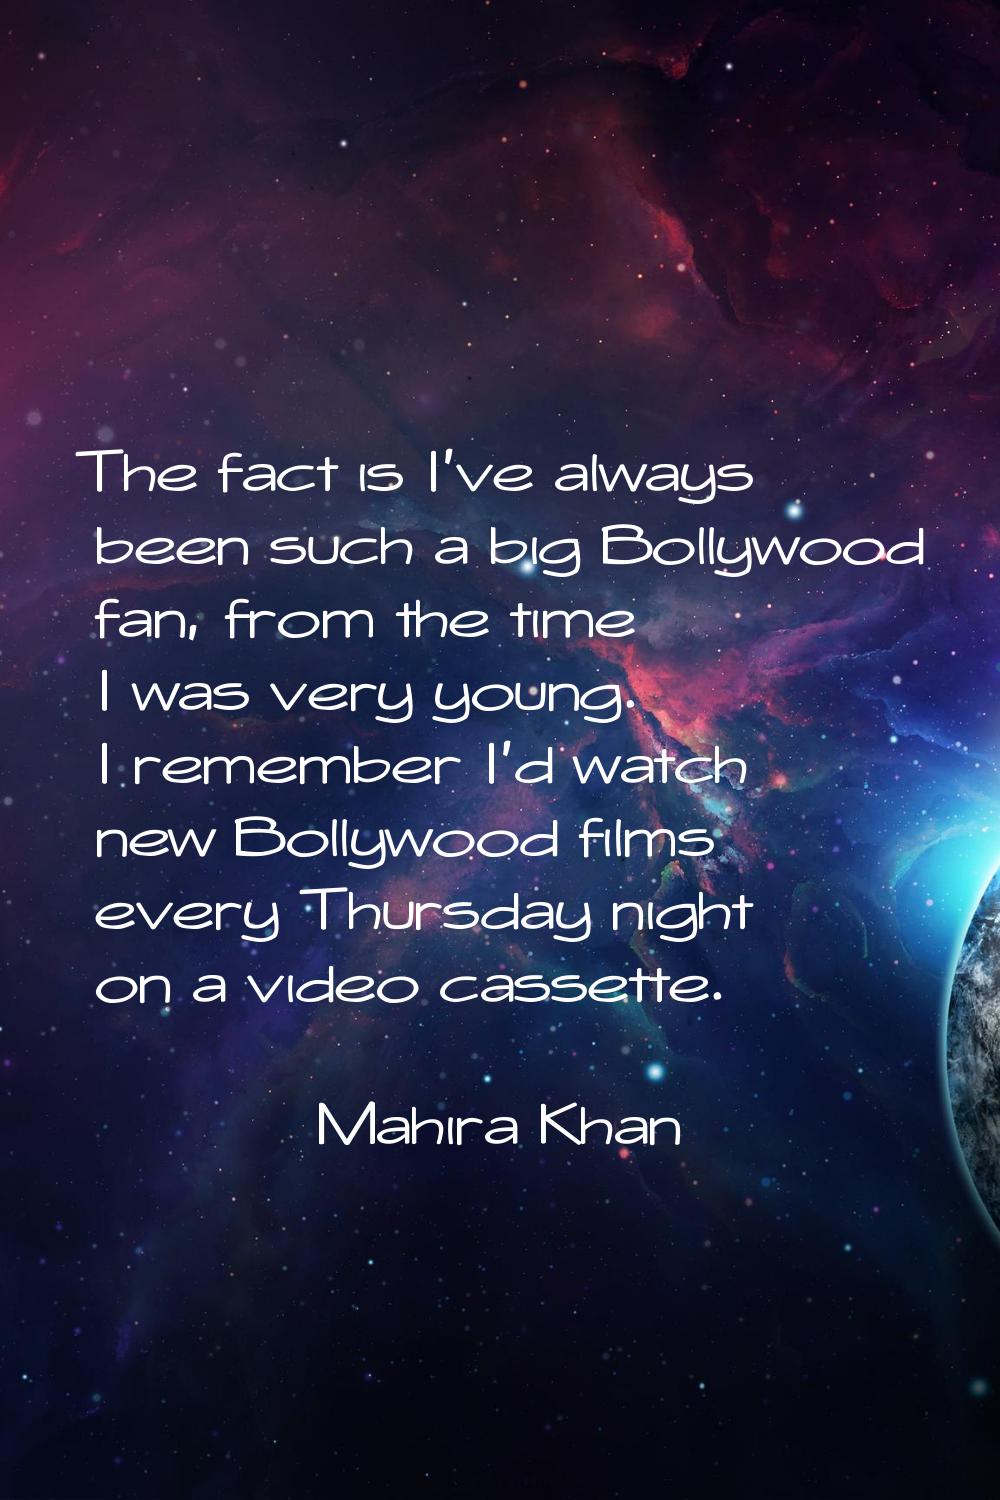 The fact is I've always been such a big Bollywood fan, from the time I was very young. I remember I